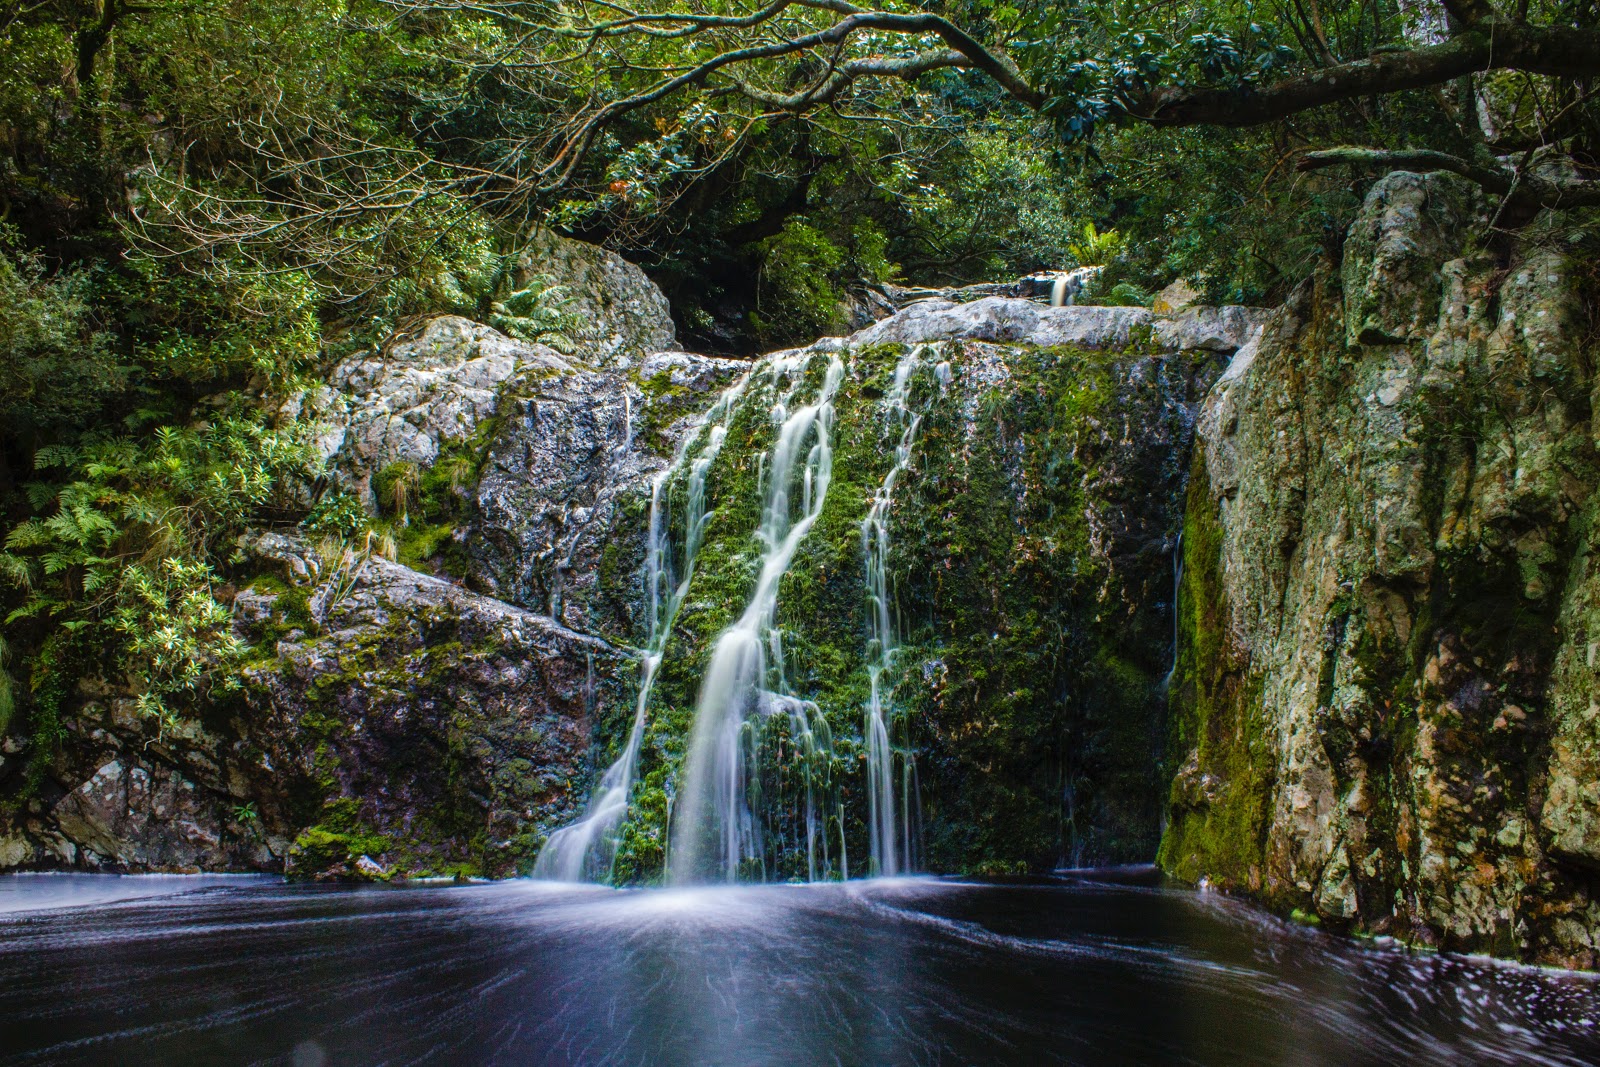 Image of a water fall in a tropical forest 